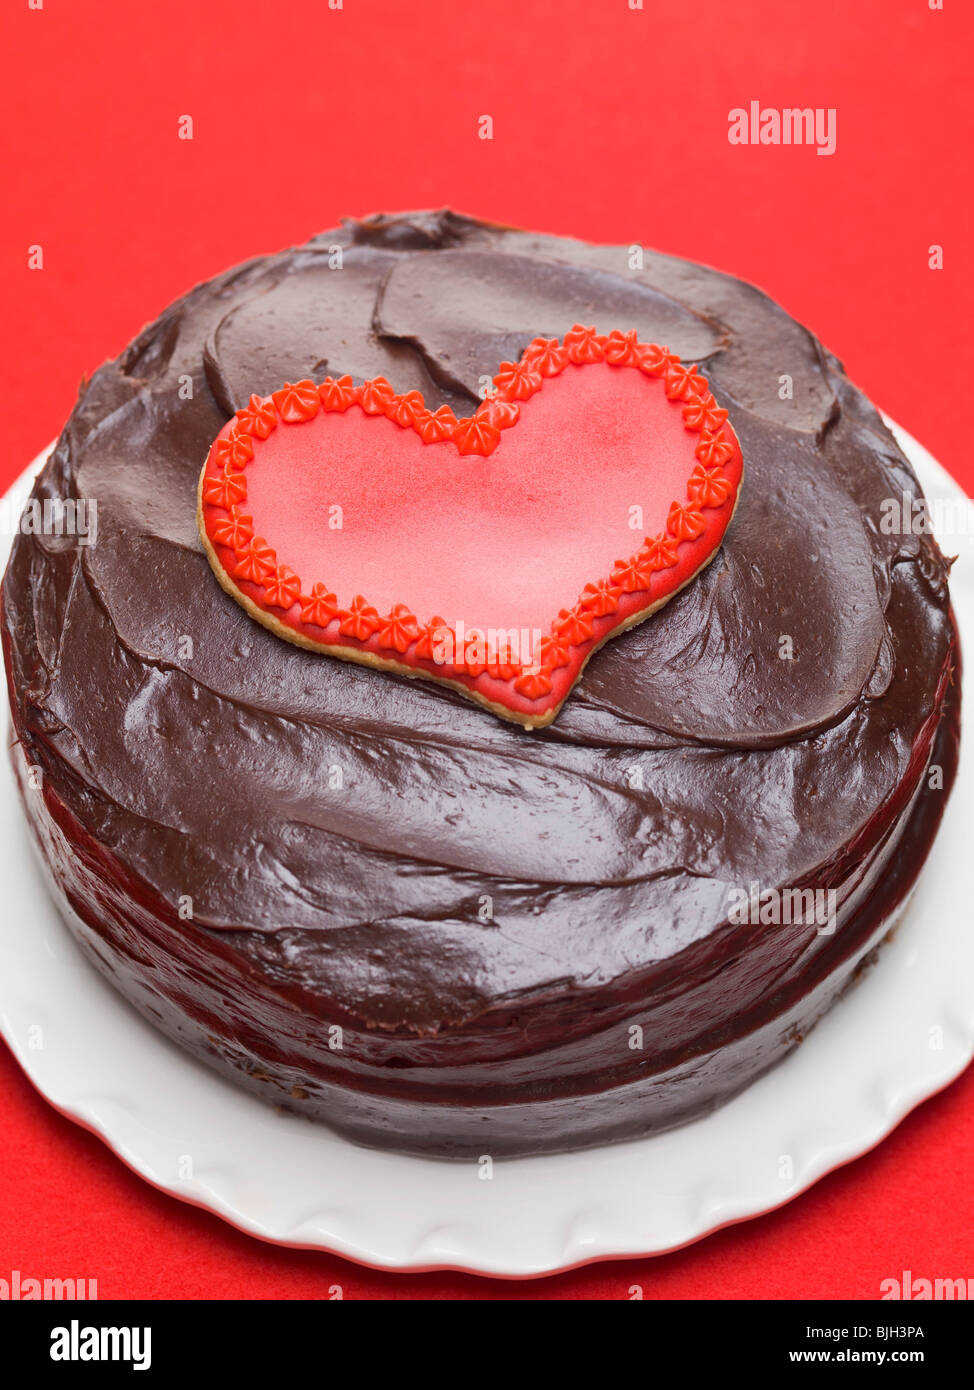 Chocolate cake with red heart-shaped biscuit Stock Photo - Alamy